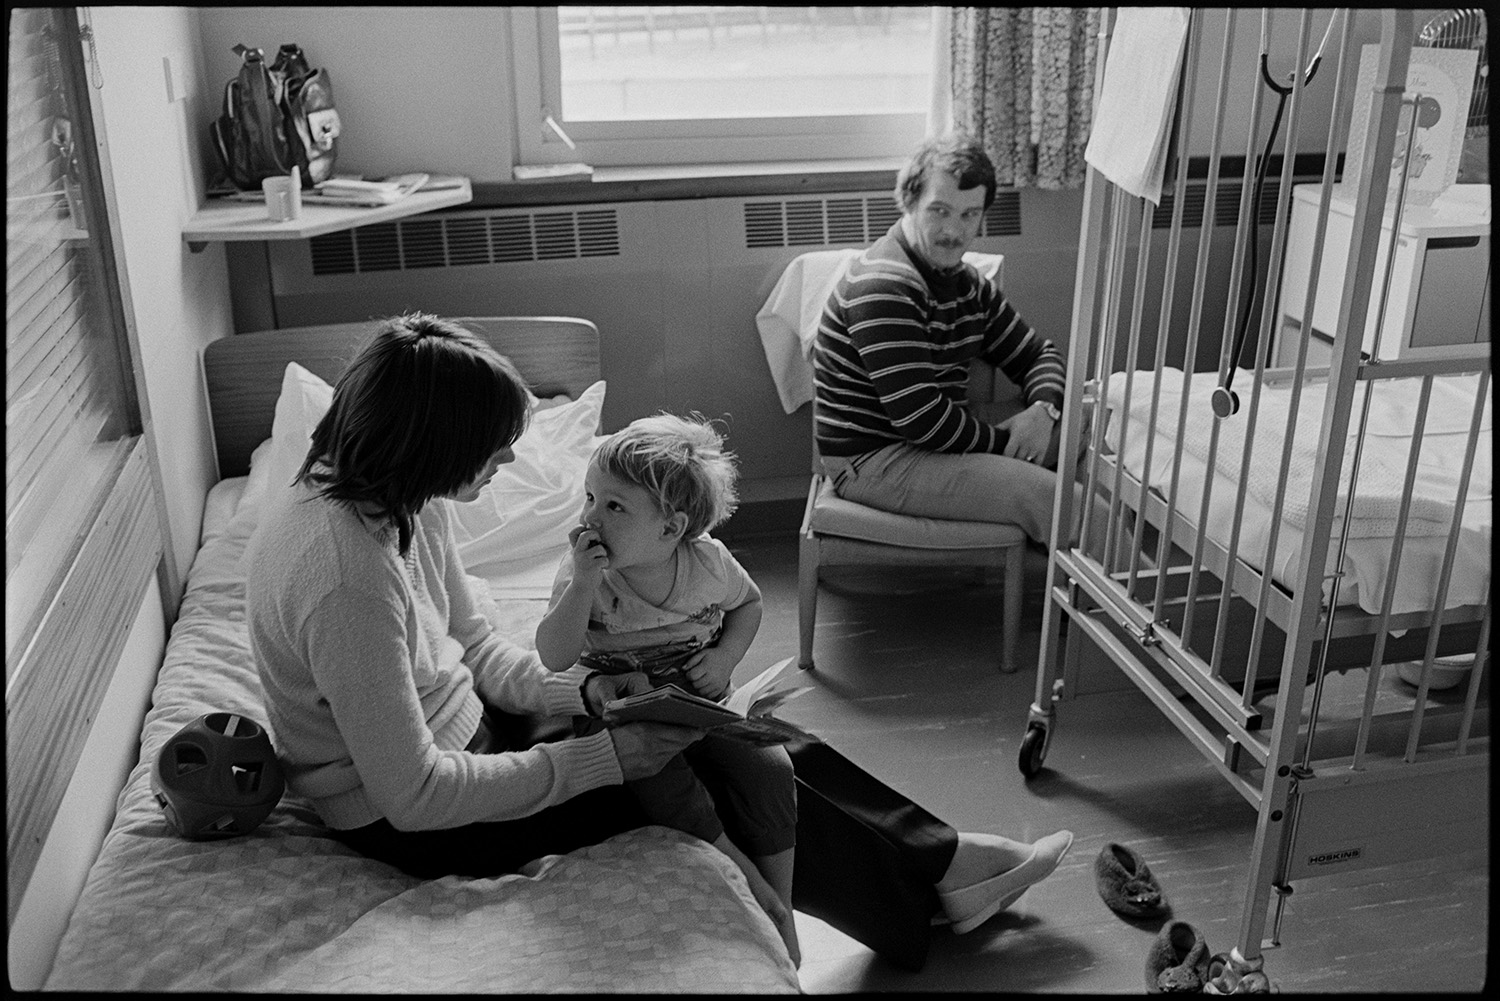 Hospital children's ward, women mothers with children in wards. Woman on telephone. 
[A woman, child and man on the children's ward at Barnstaple General Hospital. The woman and child are sat on a bed reading a book. A cot is next to them.]